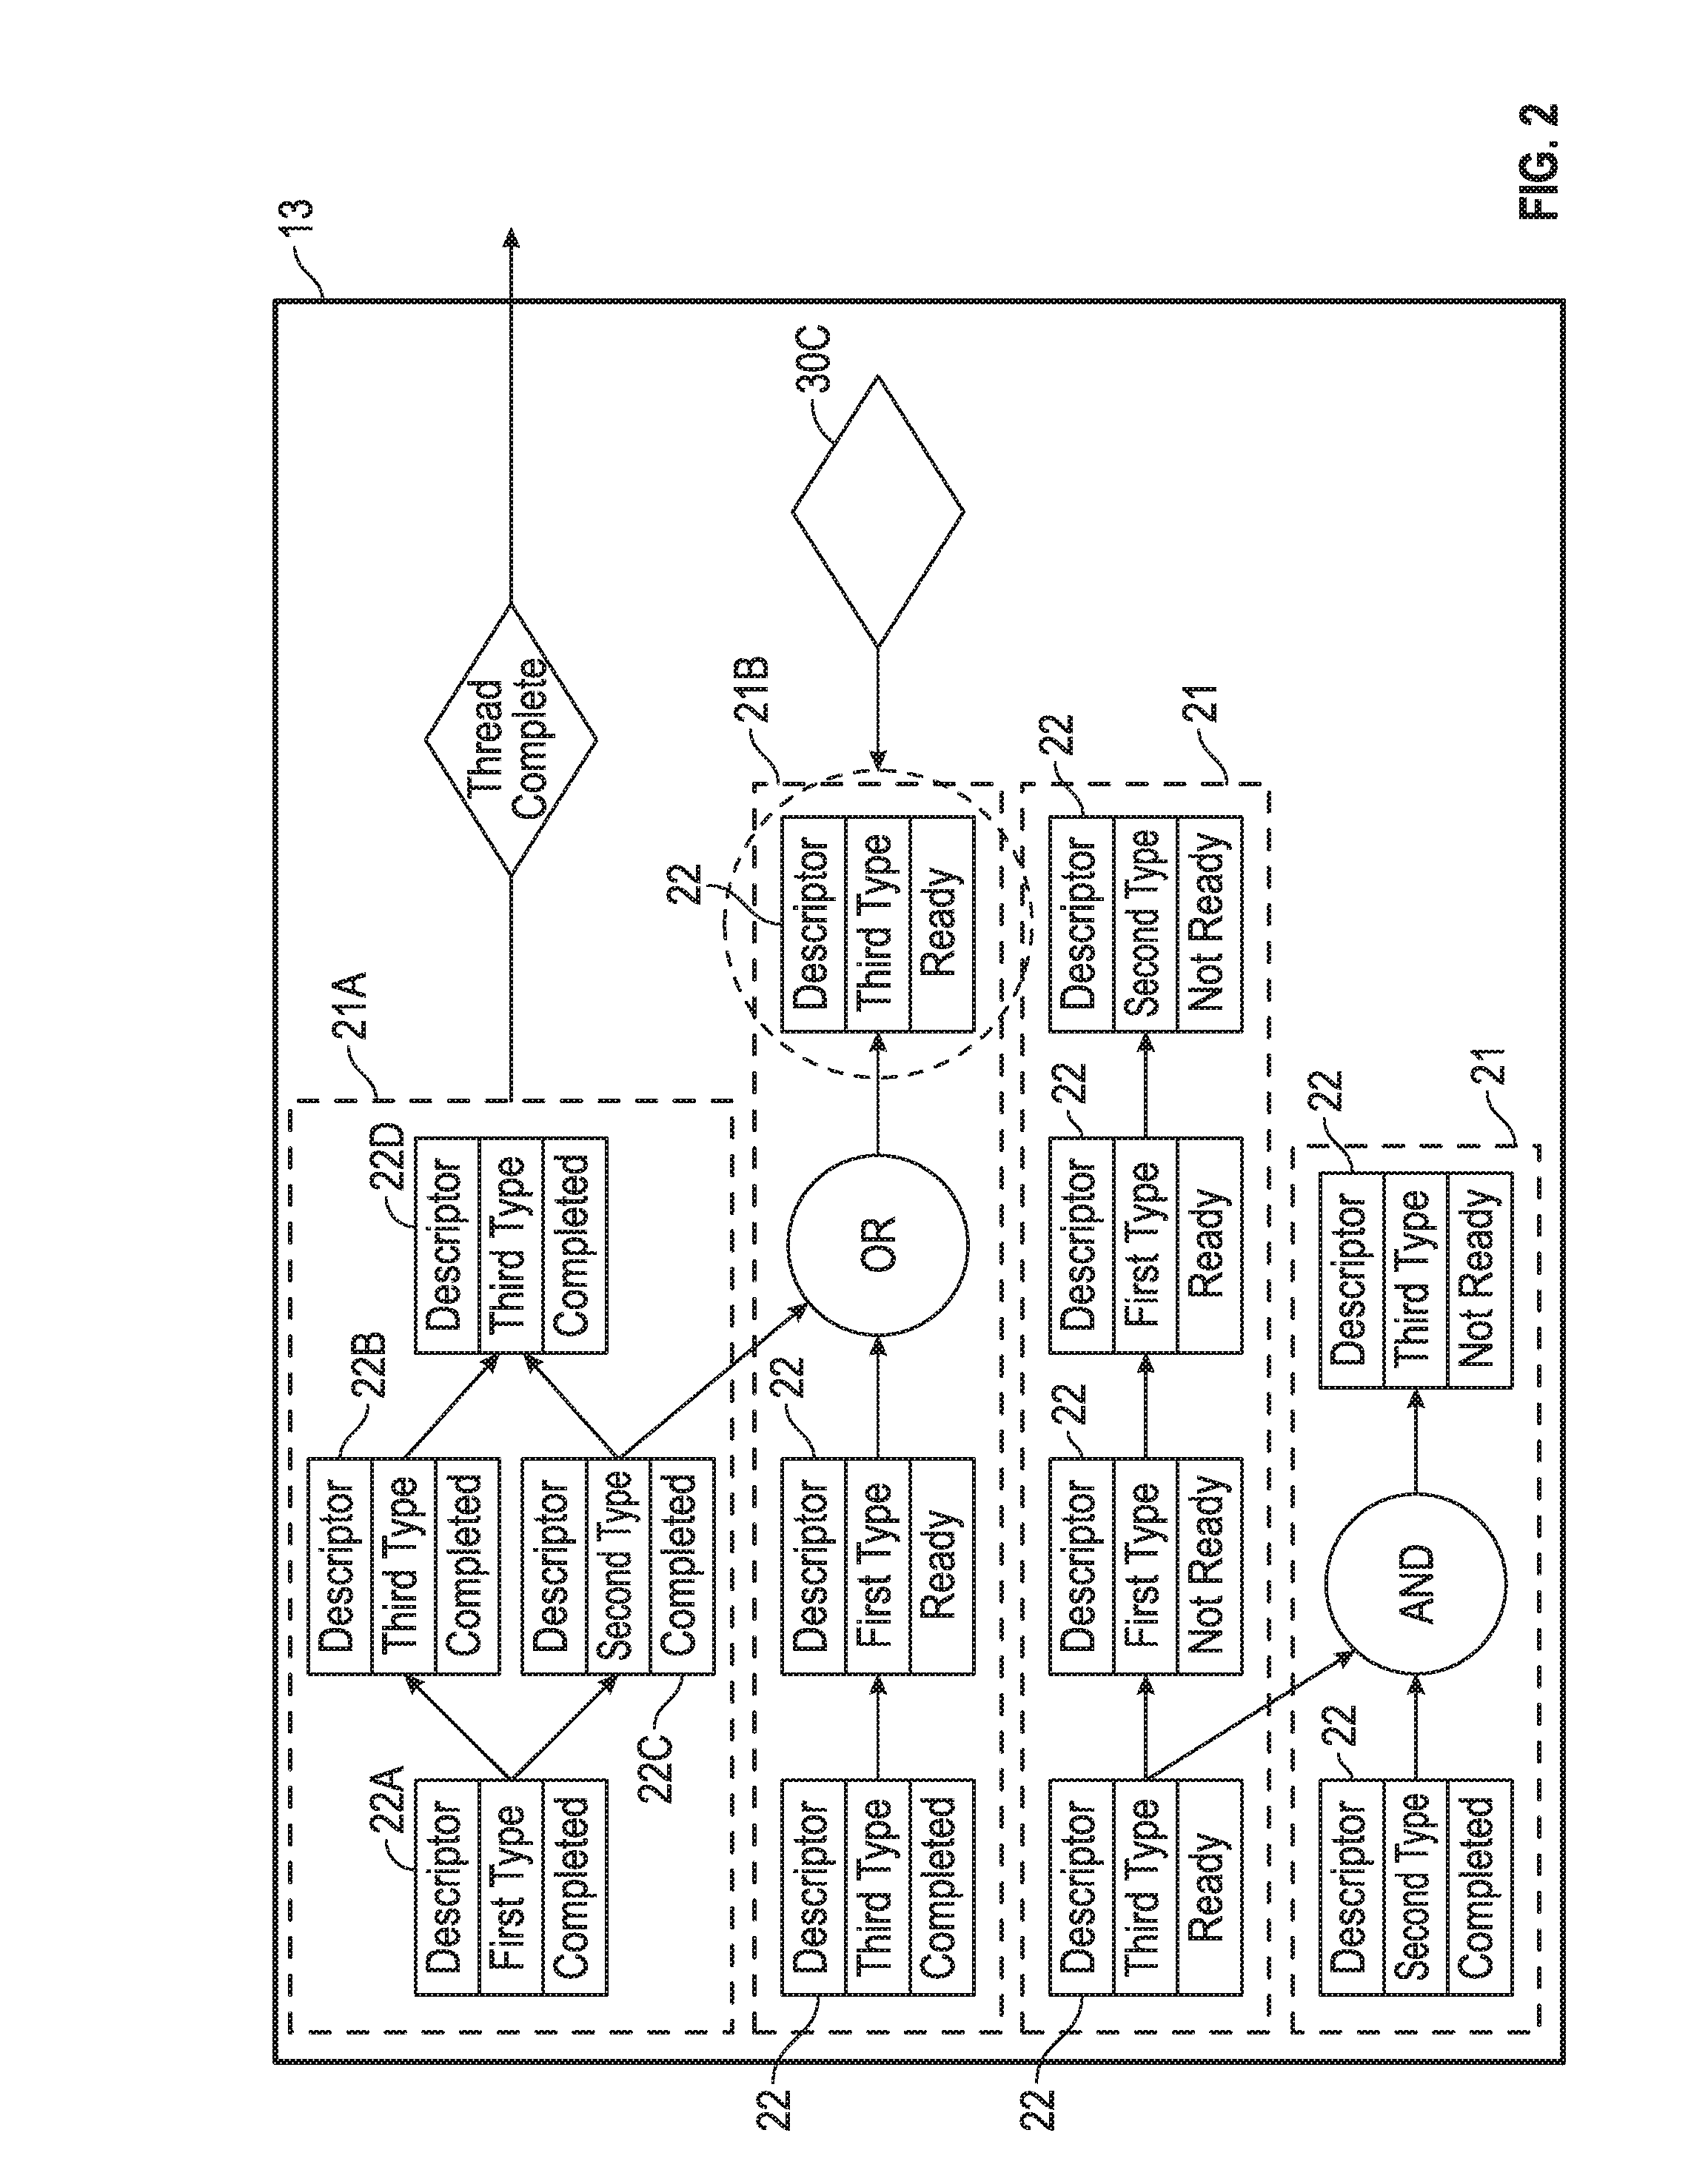 System and method for parallel processing using dynamically configurable proactive co-processing cells